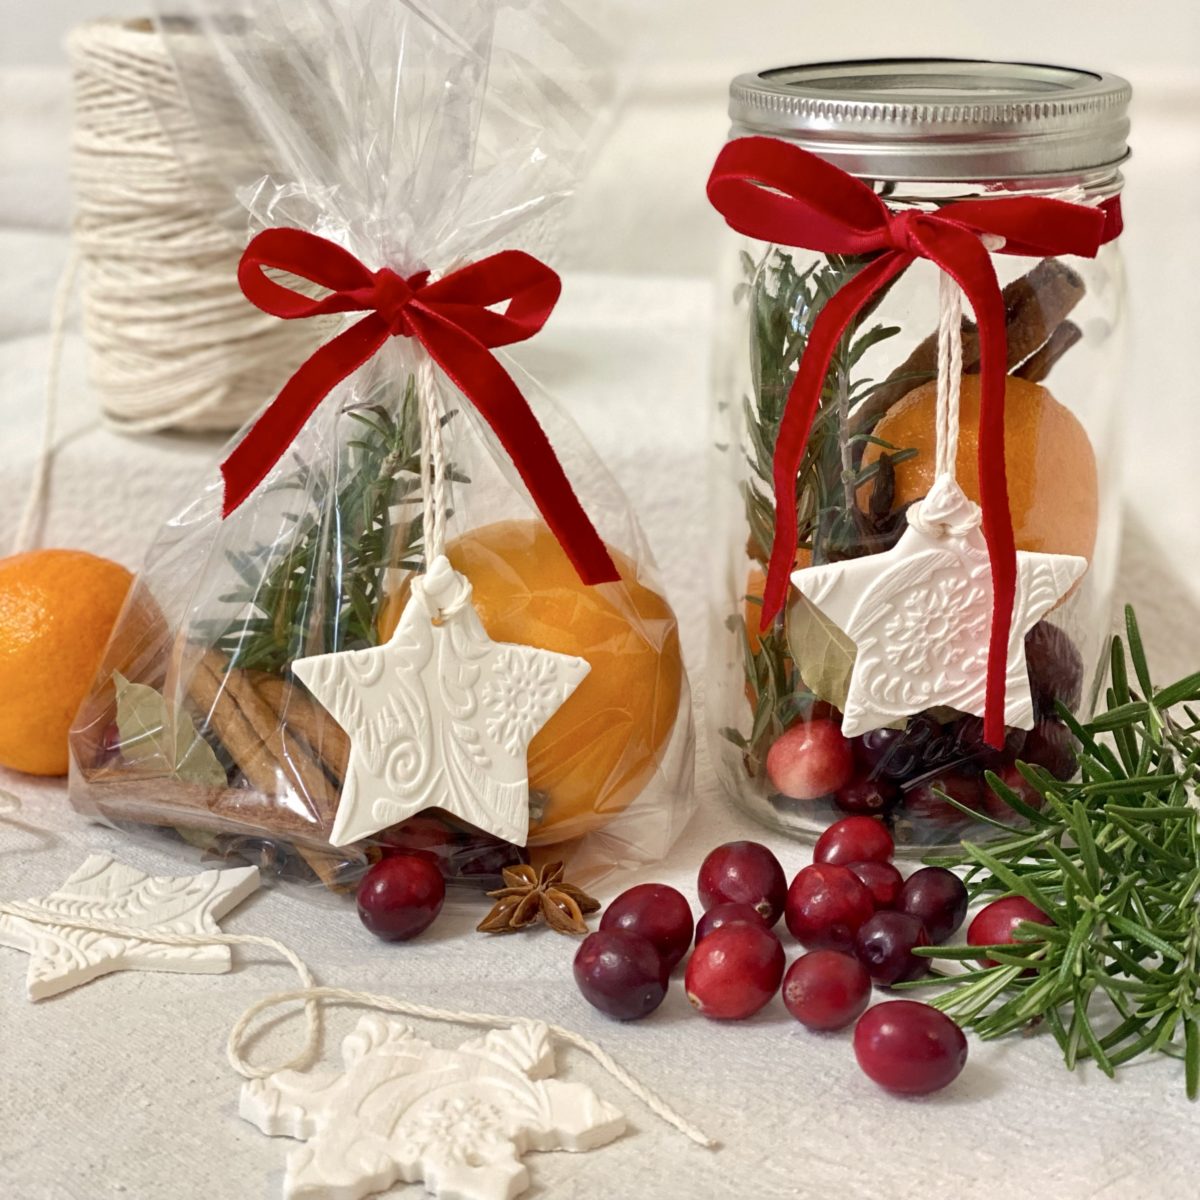 DIY simmer pot gifts, one in a clear bag and another in a mason jar.